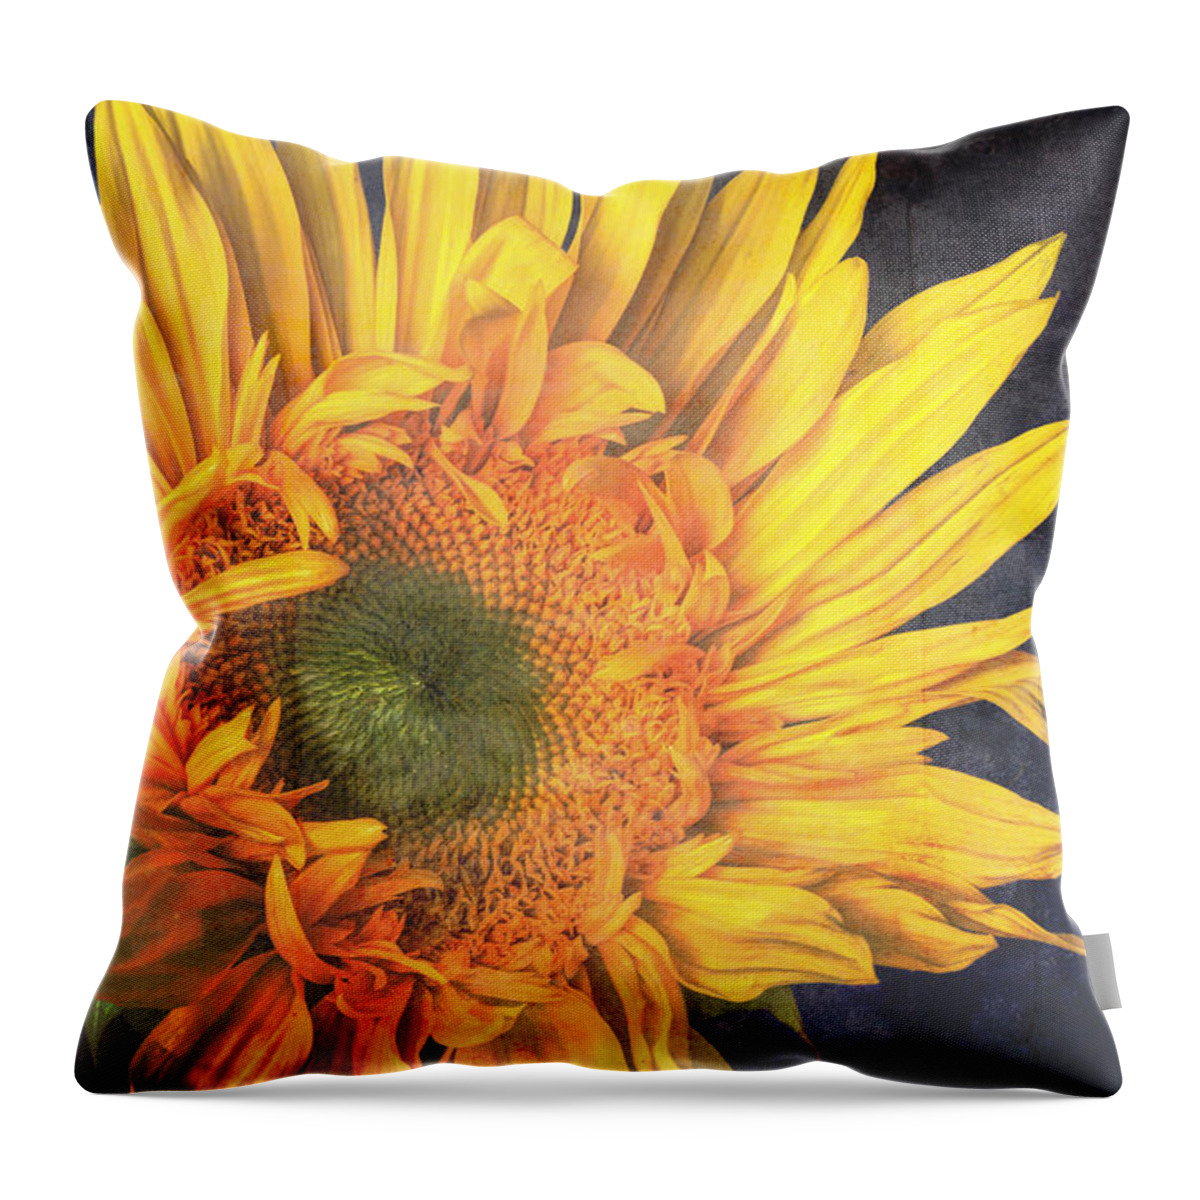 Summer Throw Pillow featuring the photograph Summer Nights by Heidi Smith